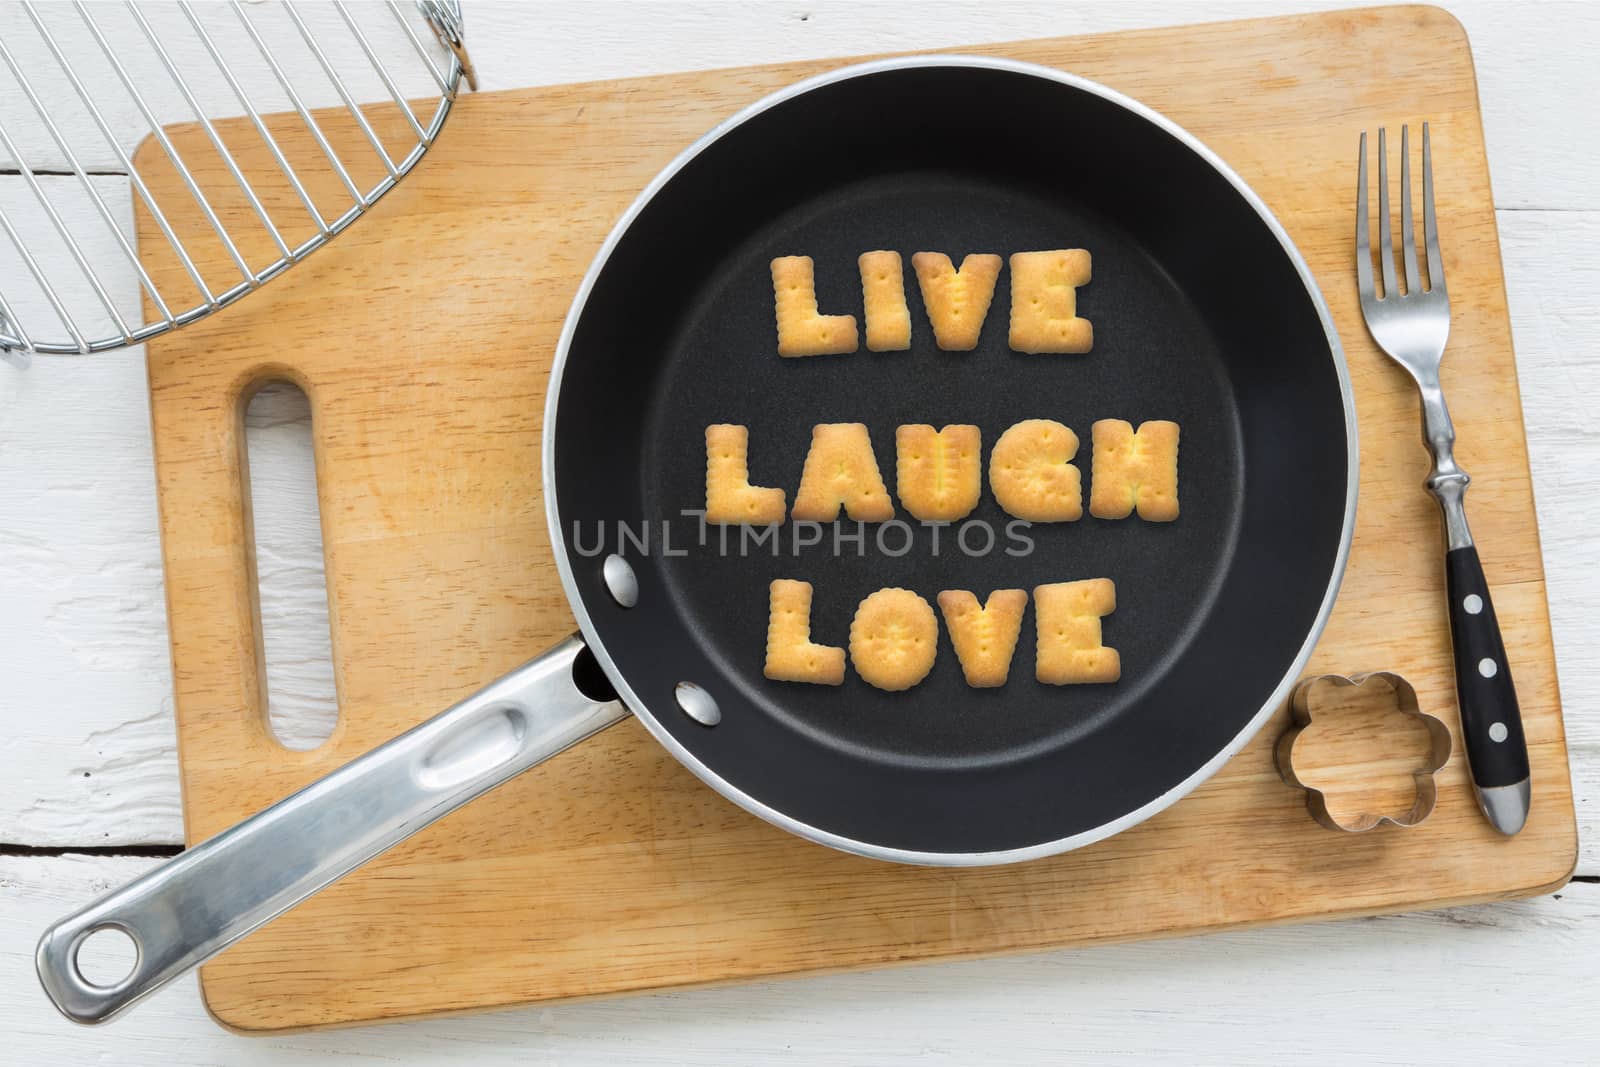 Letter cookies word LIVE LAUGH LOVE and kitchen utensils by vinnstock